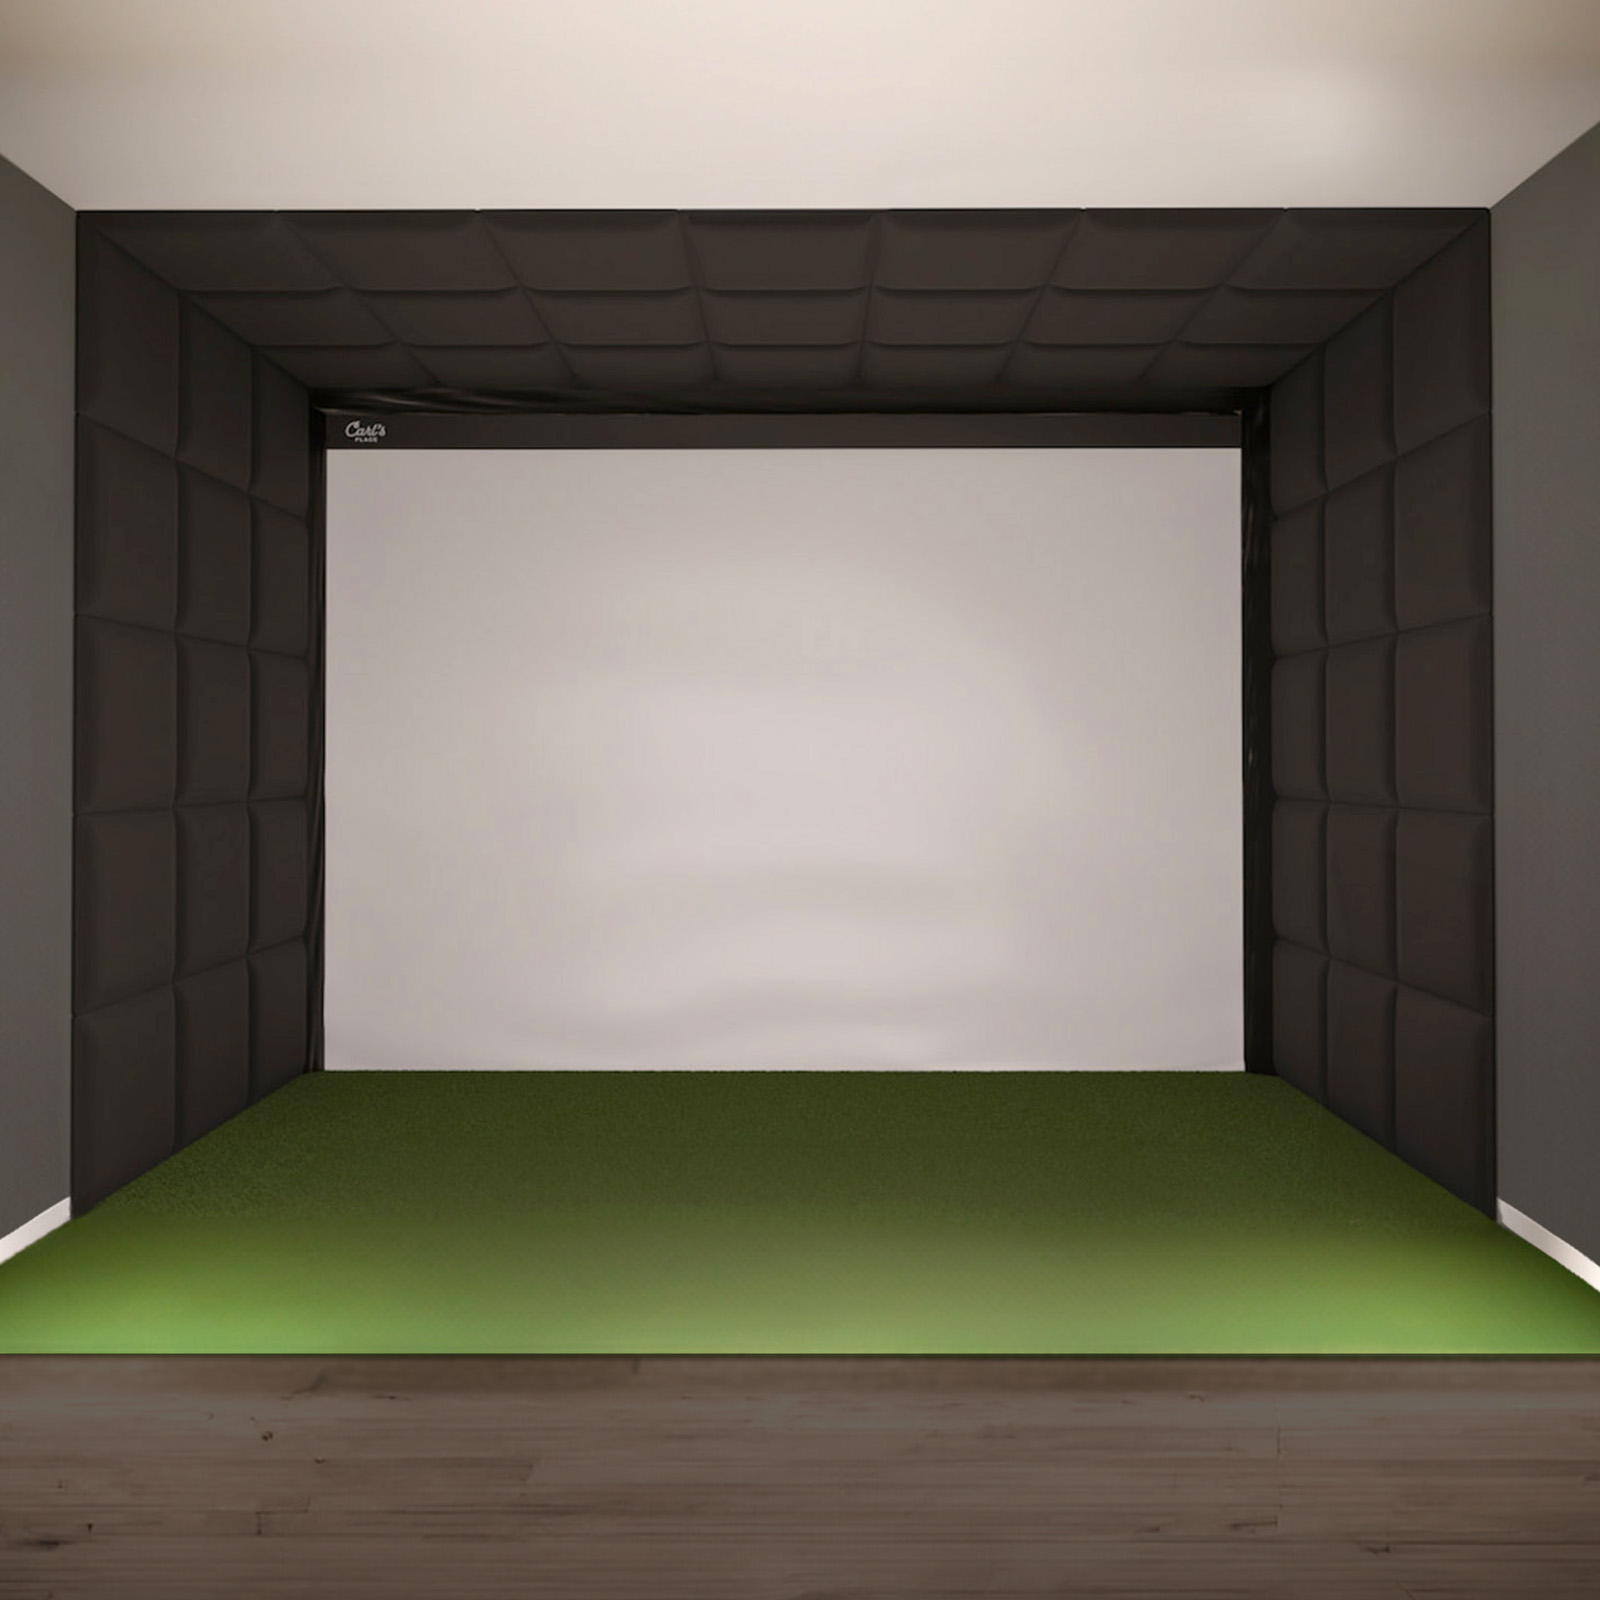 Built-In Golf Room Kit with Screen, Wall and Ceiling Panels